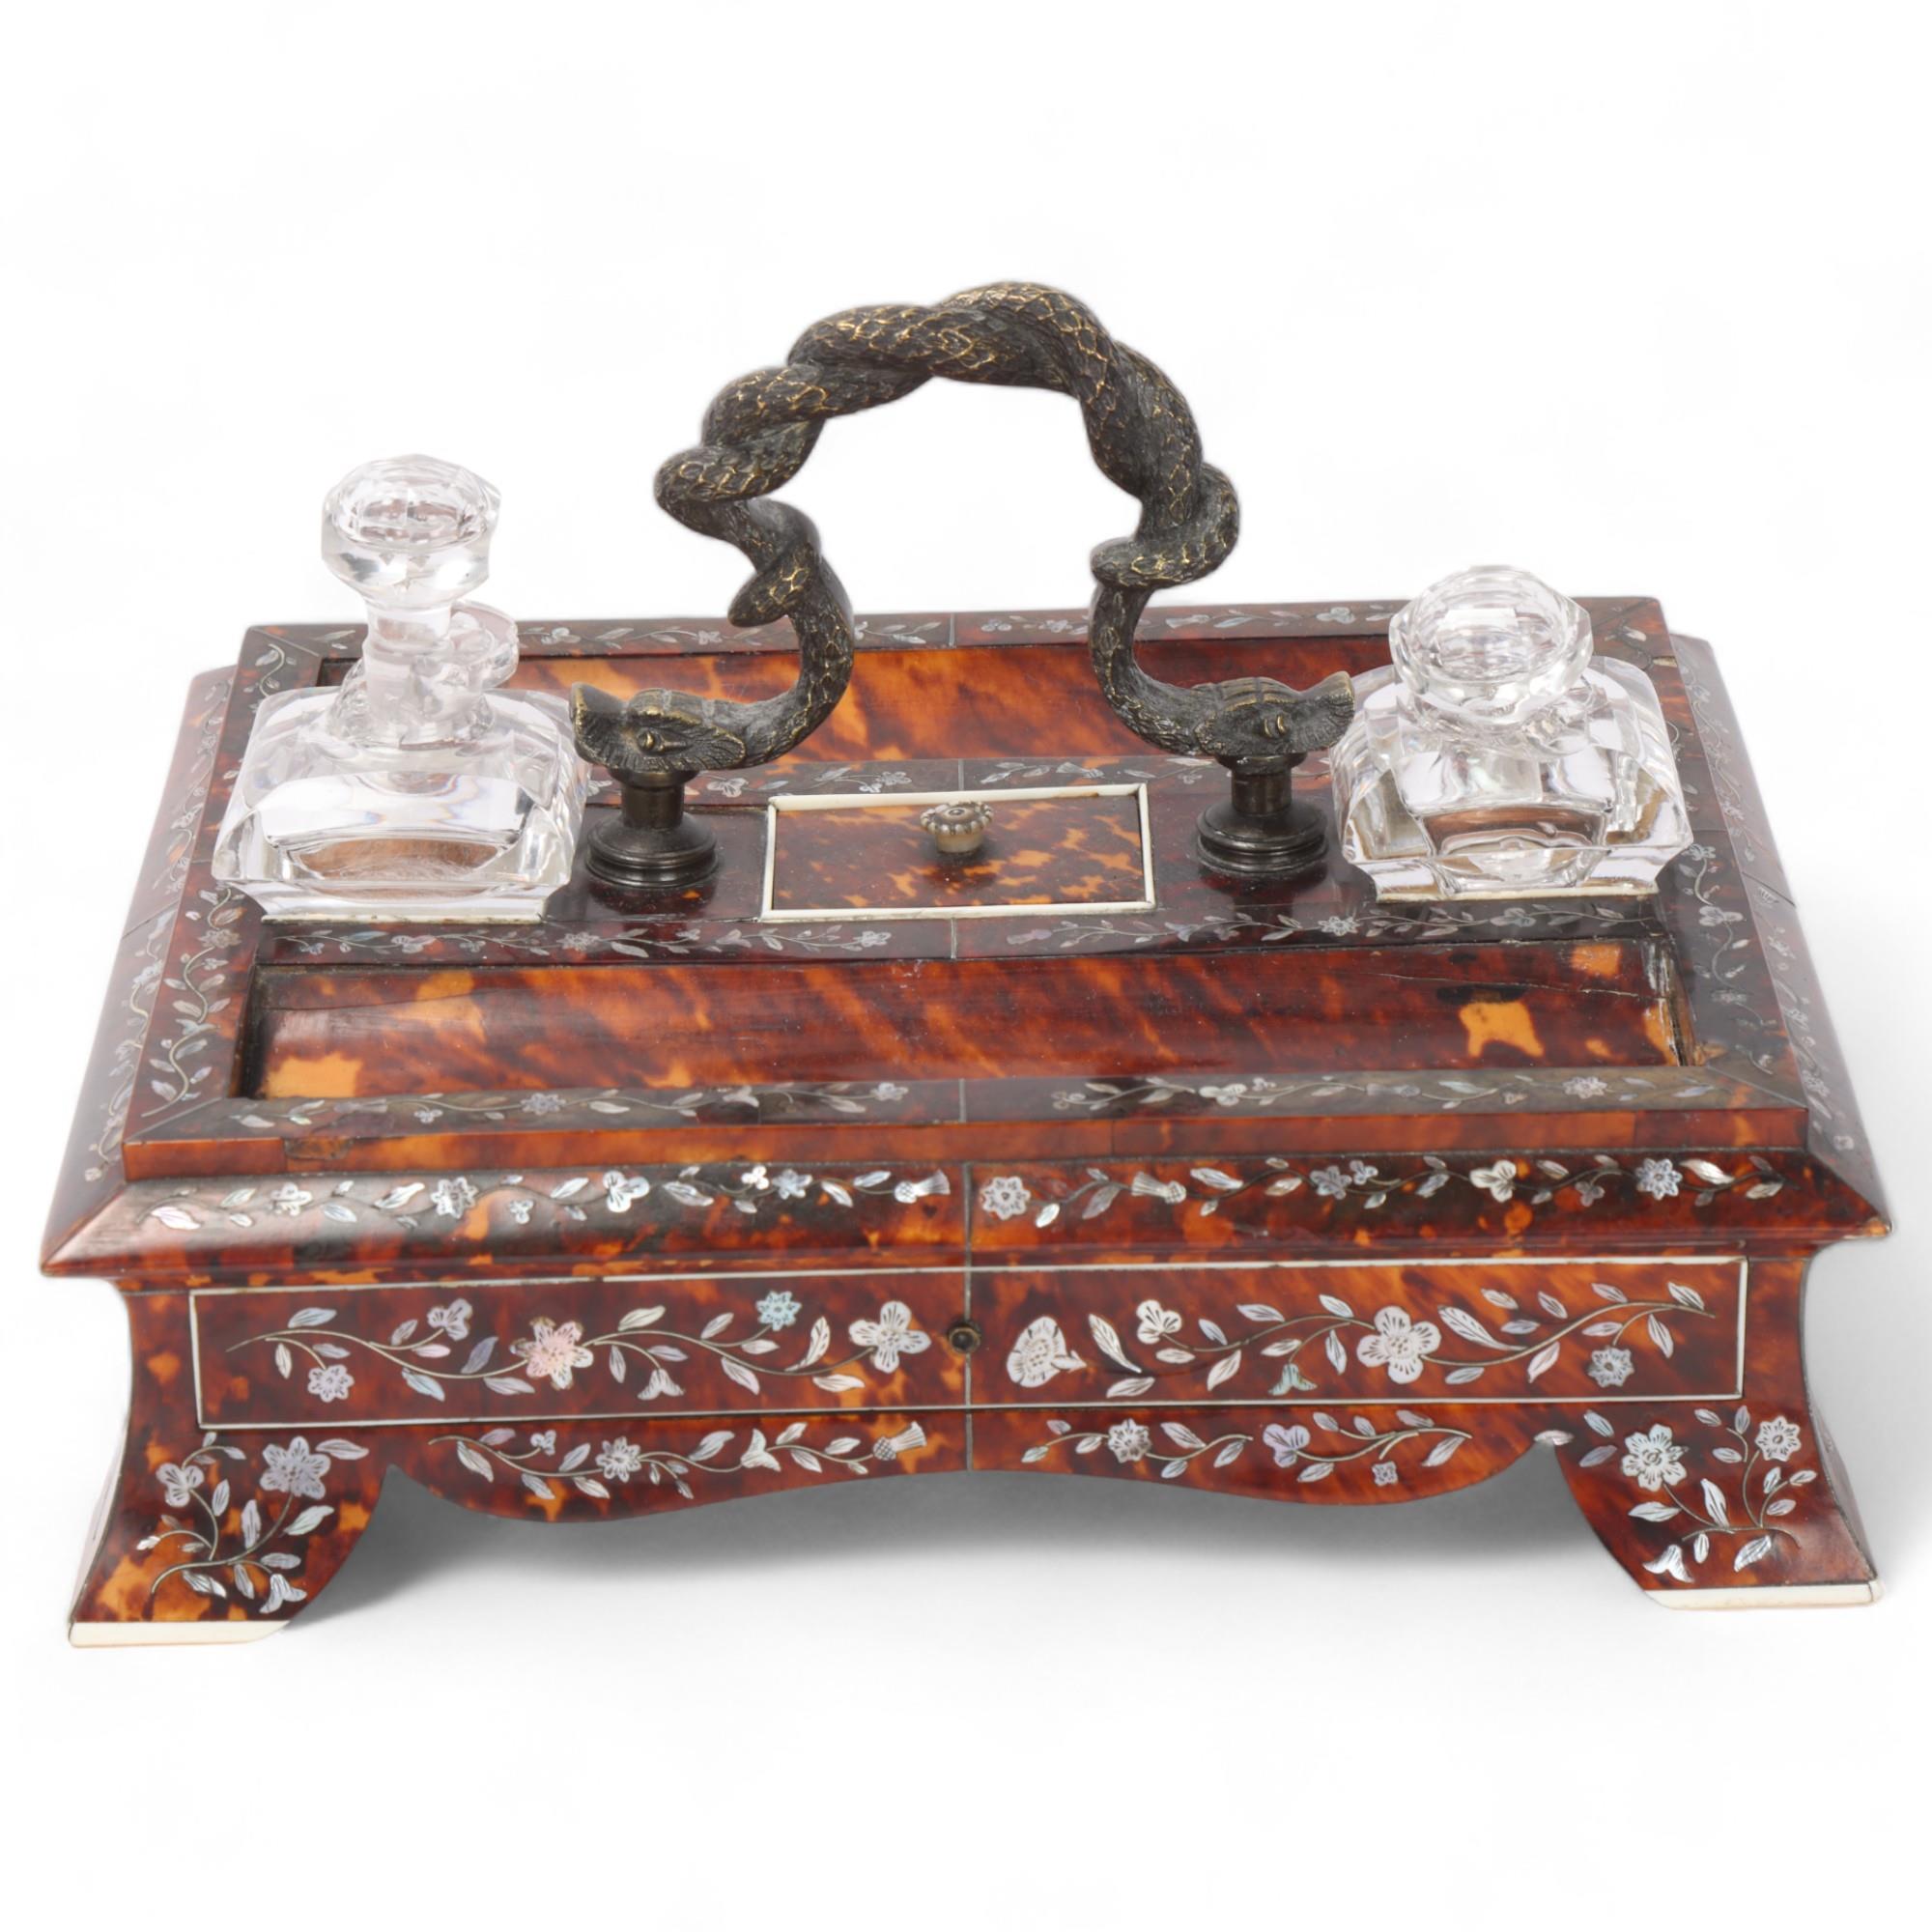 A Victorian tortoiseshell desk stand, with bronze serpent handle, inlaid mother-of-pearl and